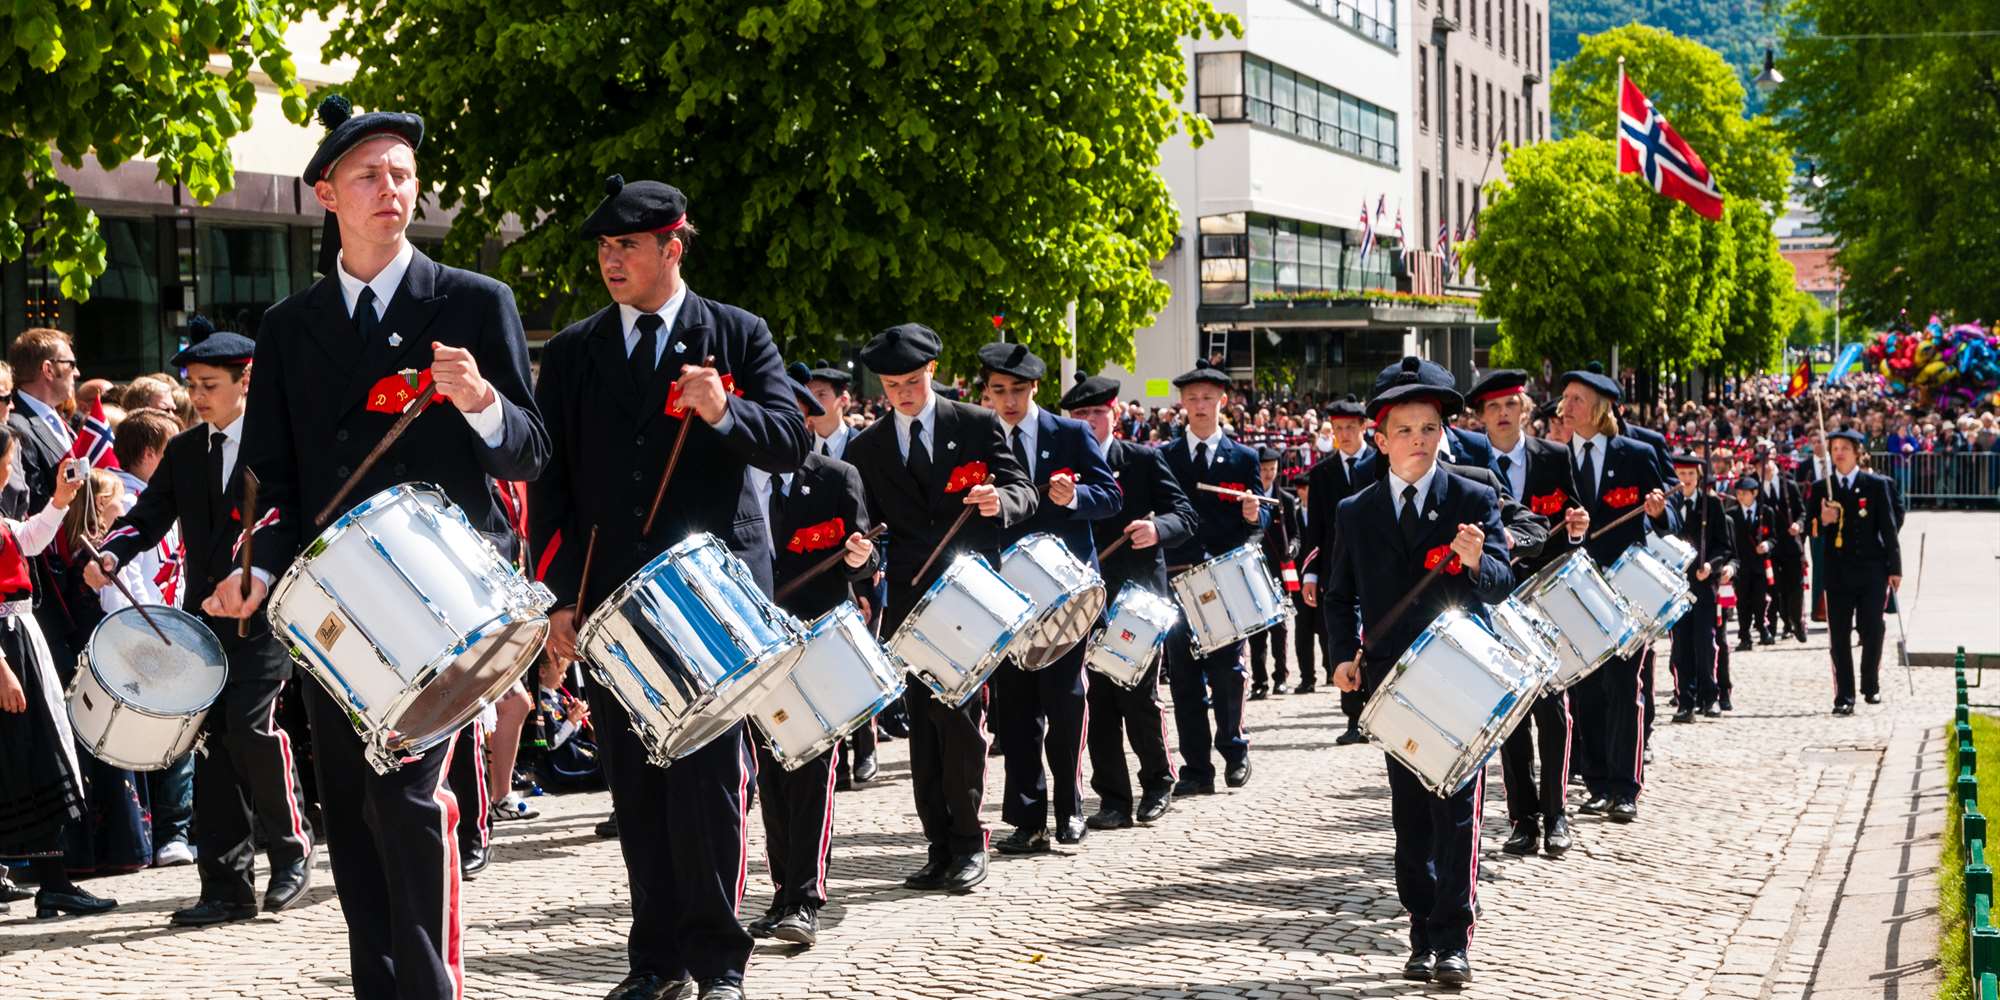 17th May celebrations in Bergen